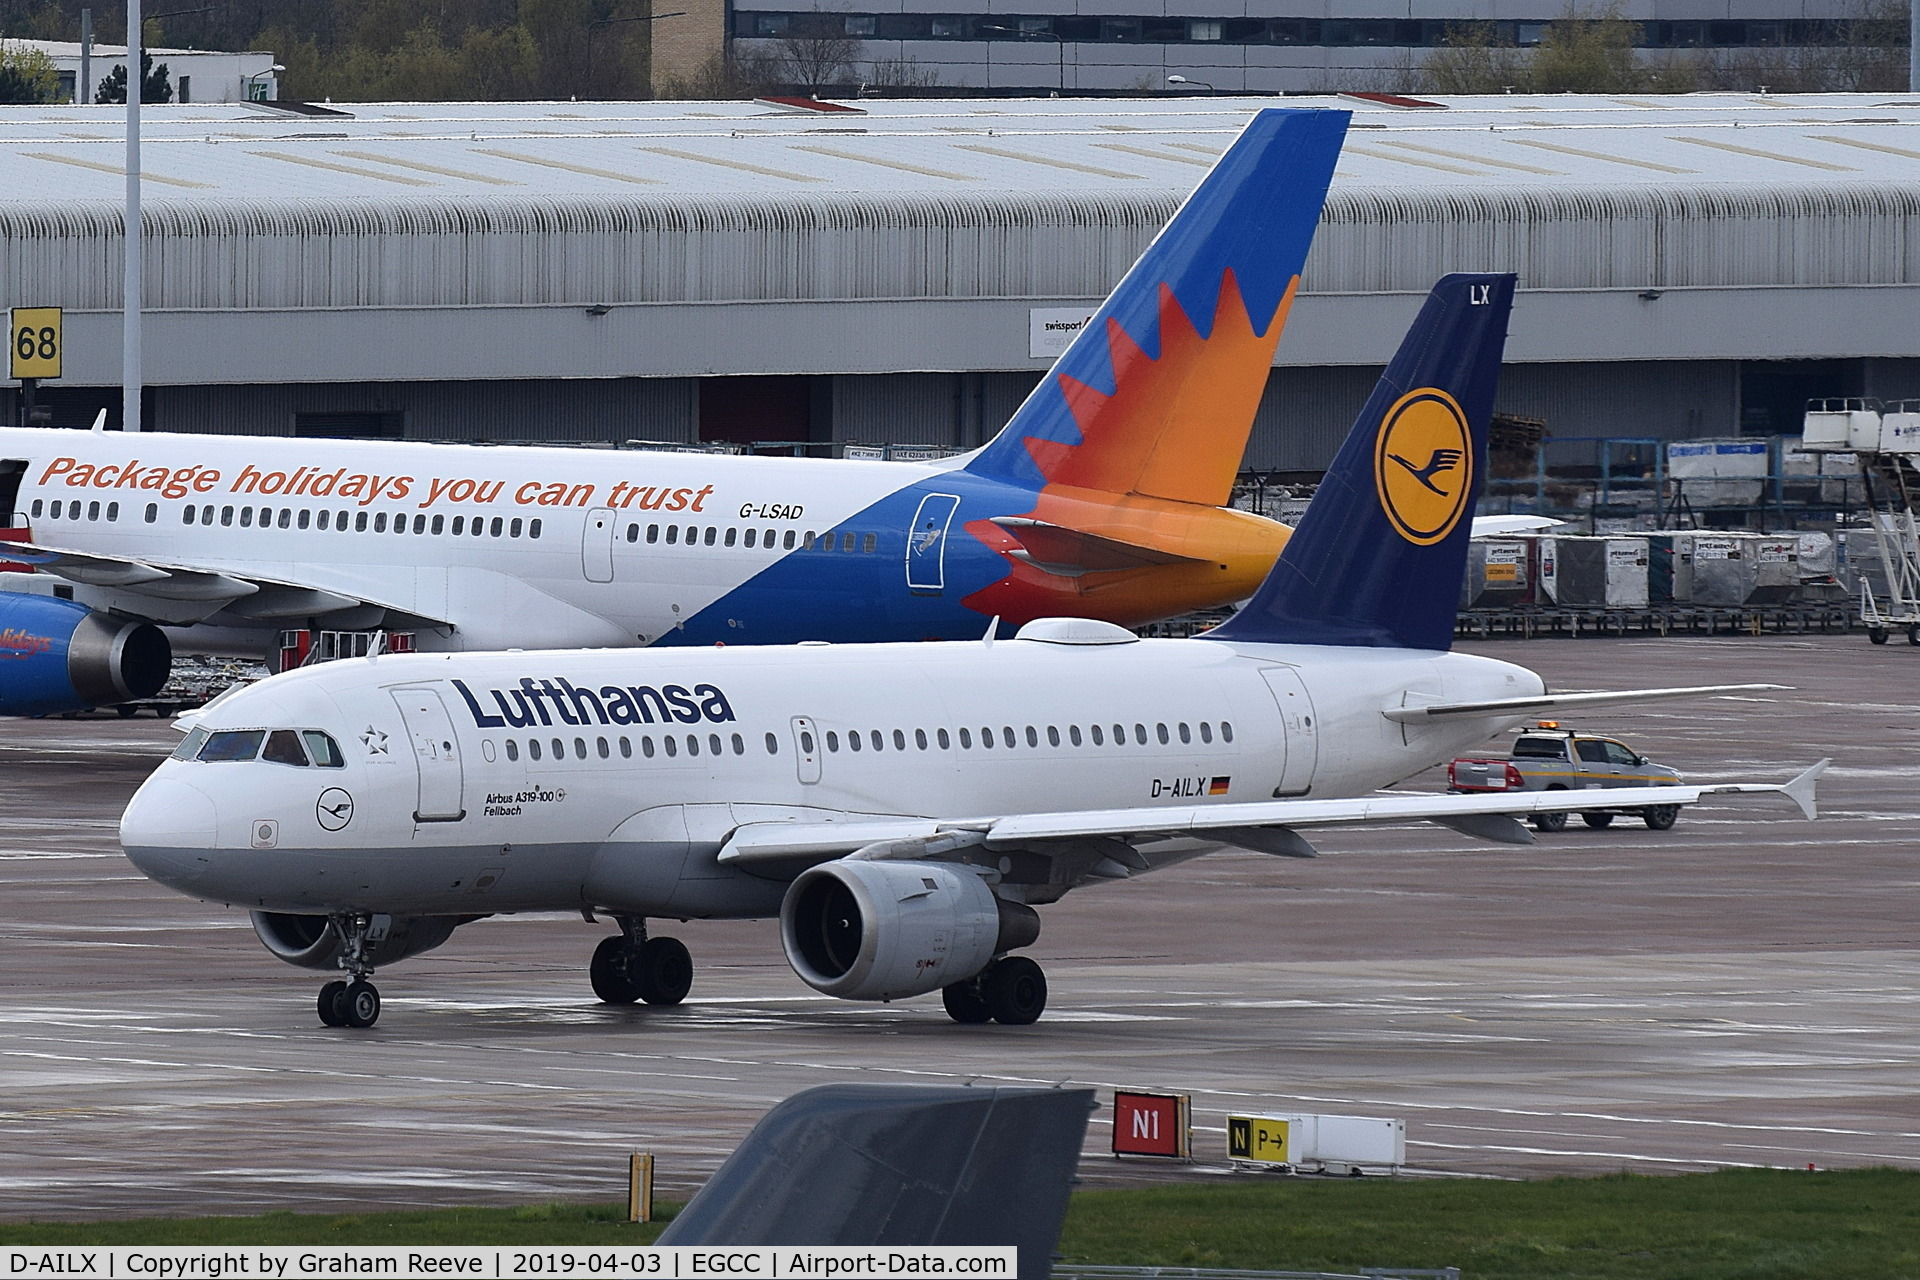 D-AILX, 1998 Airbus A319-114 C/N 860, Departing from Manchester.